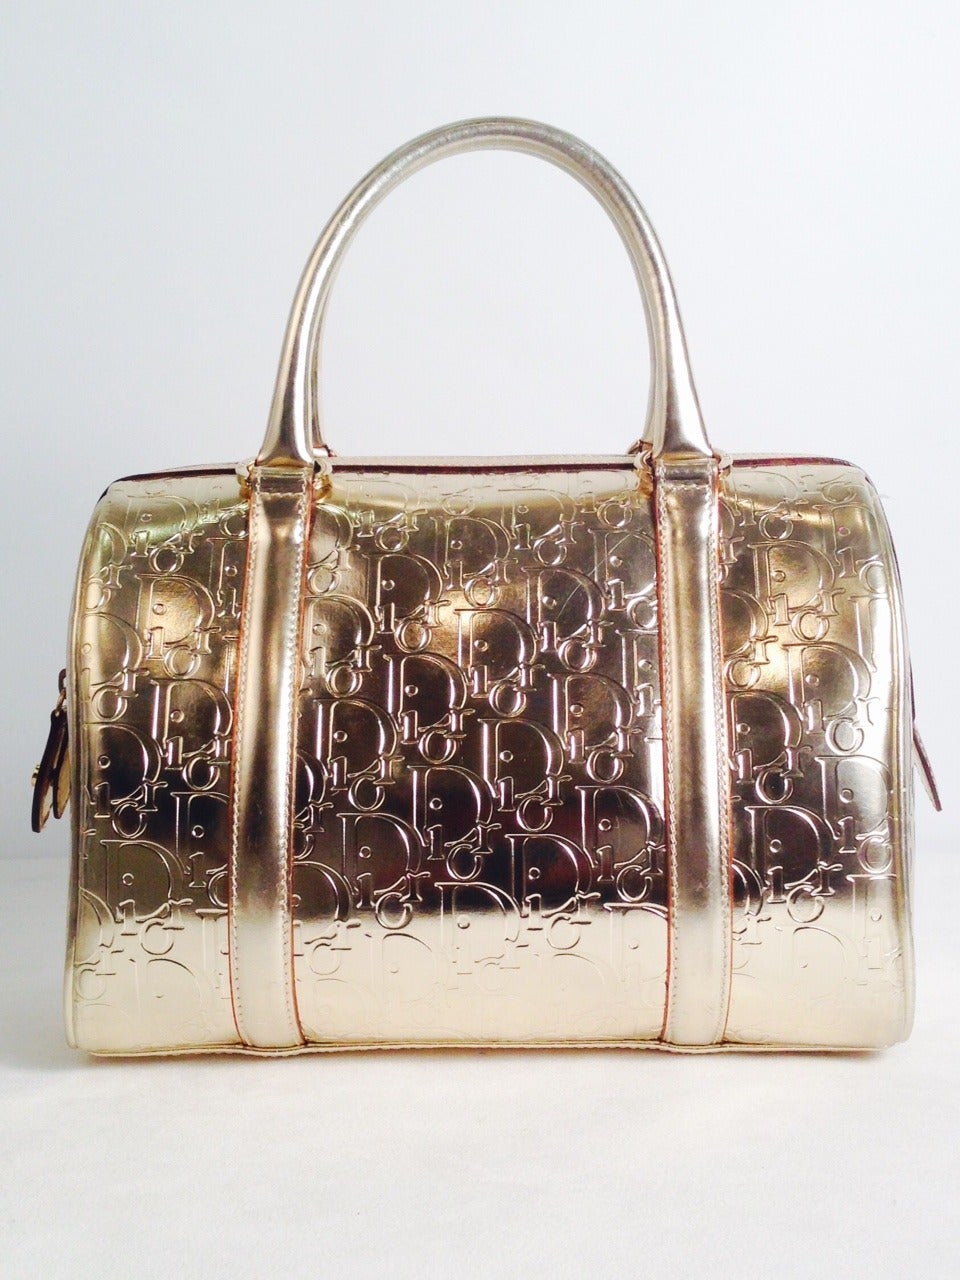 Christian Dior Gold Metallic Leather bag gives the impression of pure 24K gold!  Features include signature logo embossed all over, top zipper, and double handles.  Interior is crafted from luxurious linen and cotton blend fabric and has one